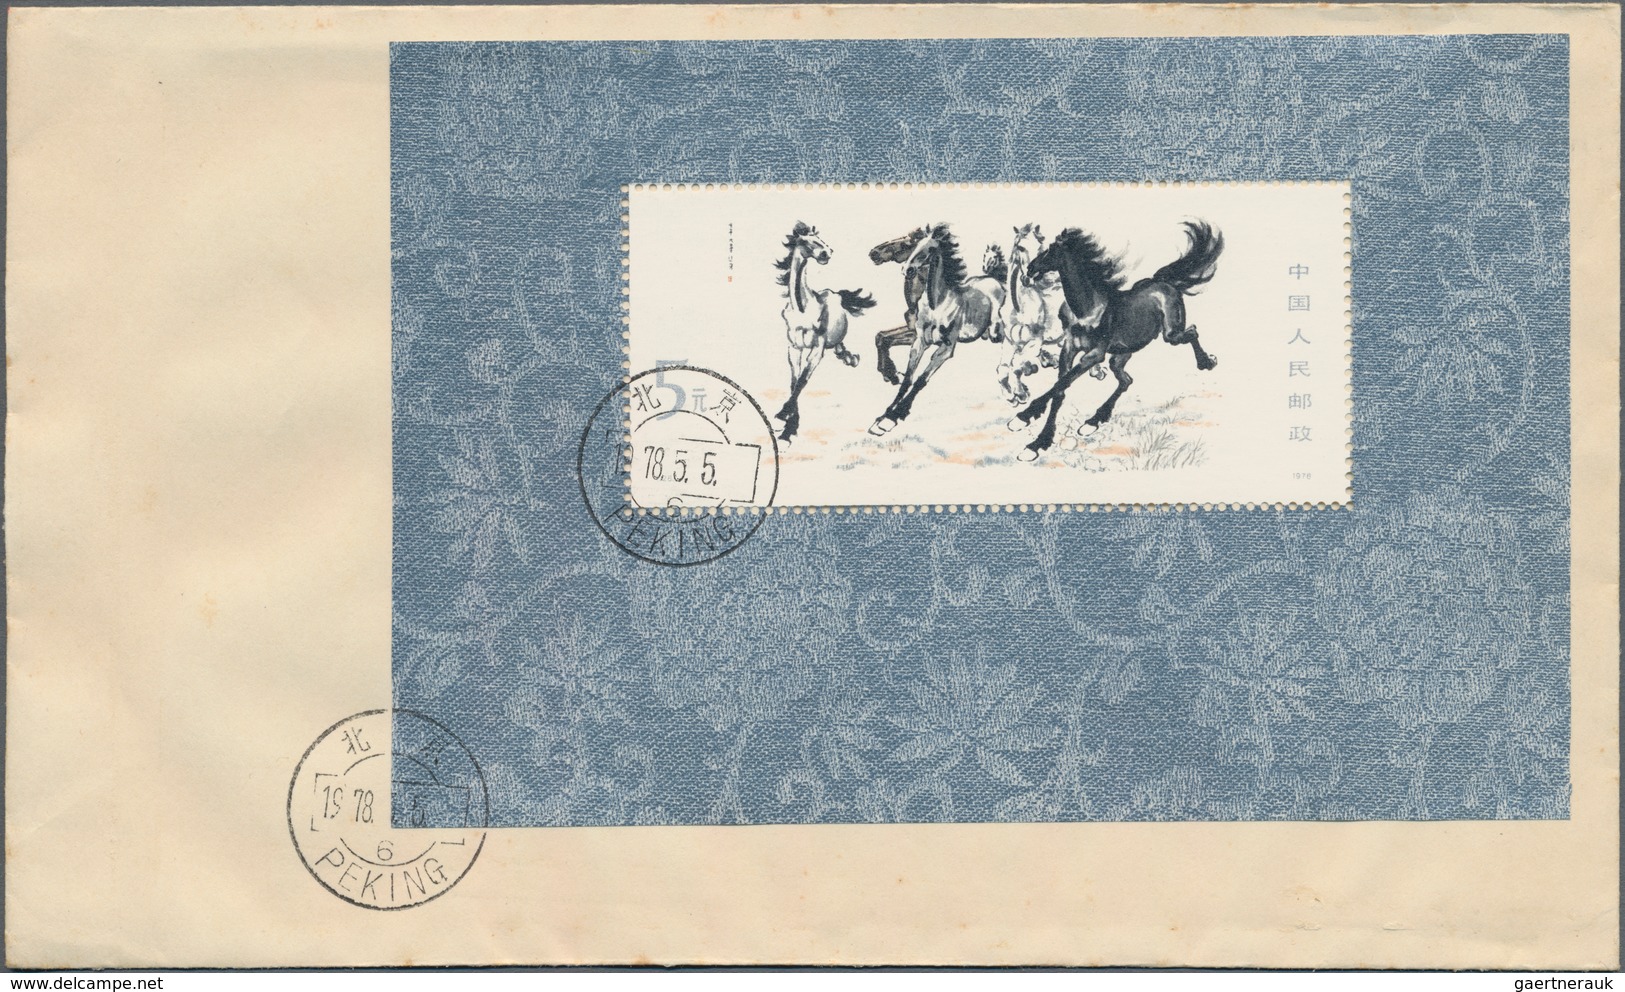 China - Volksrepublik: 1978, Galloping Horses S/s (T28M), CTO Used And FDC, FDC With Slight Faults ( - Lettres & Documents